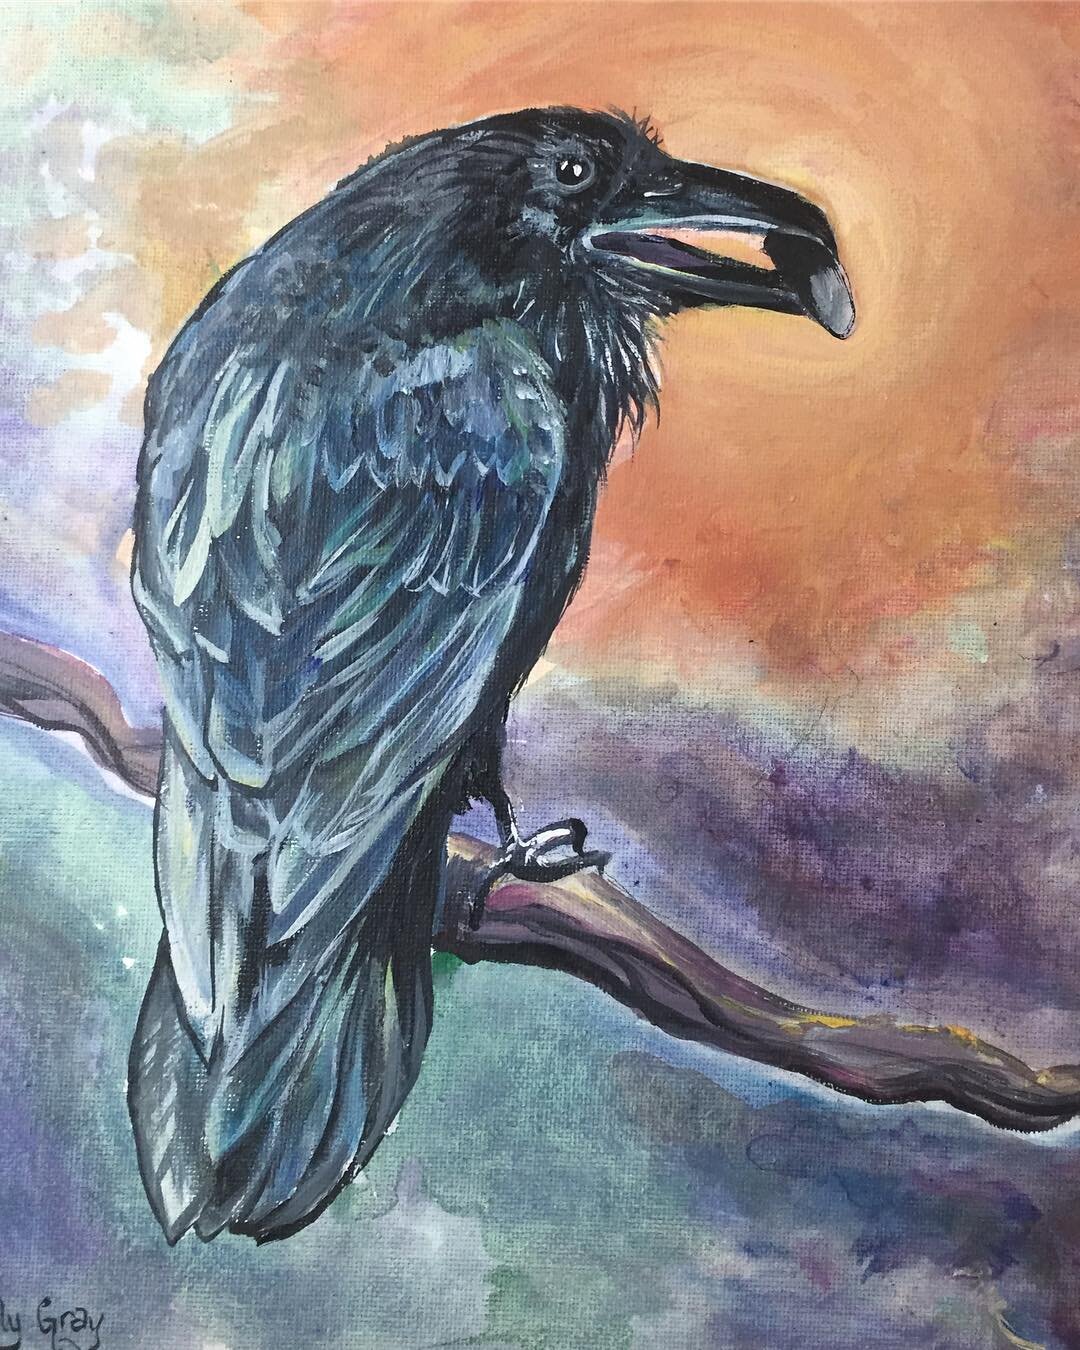 🎶 On the first day of Christmas my true love gave to me a Raven in a beer tree. 🌲 🍺  One of my paintings on display @naamrestaurant and available for purchase through my website www.emilygray.ca #emilygrayart #raven #painting #birdpainting #paint 